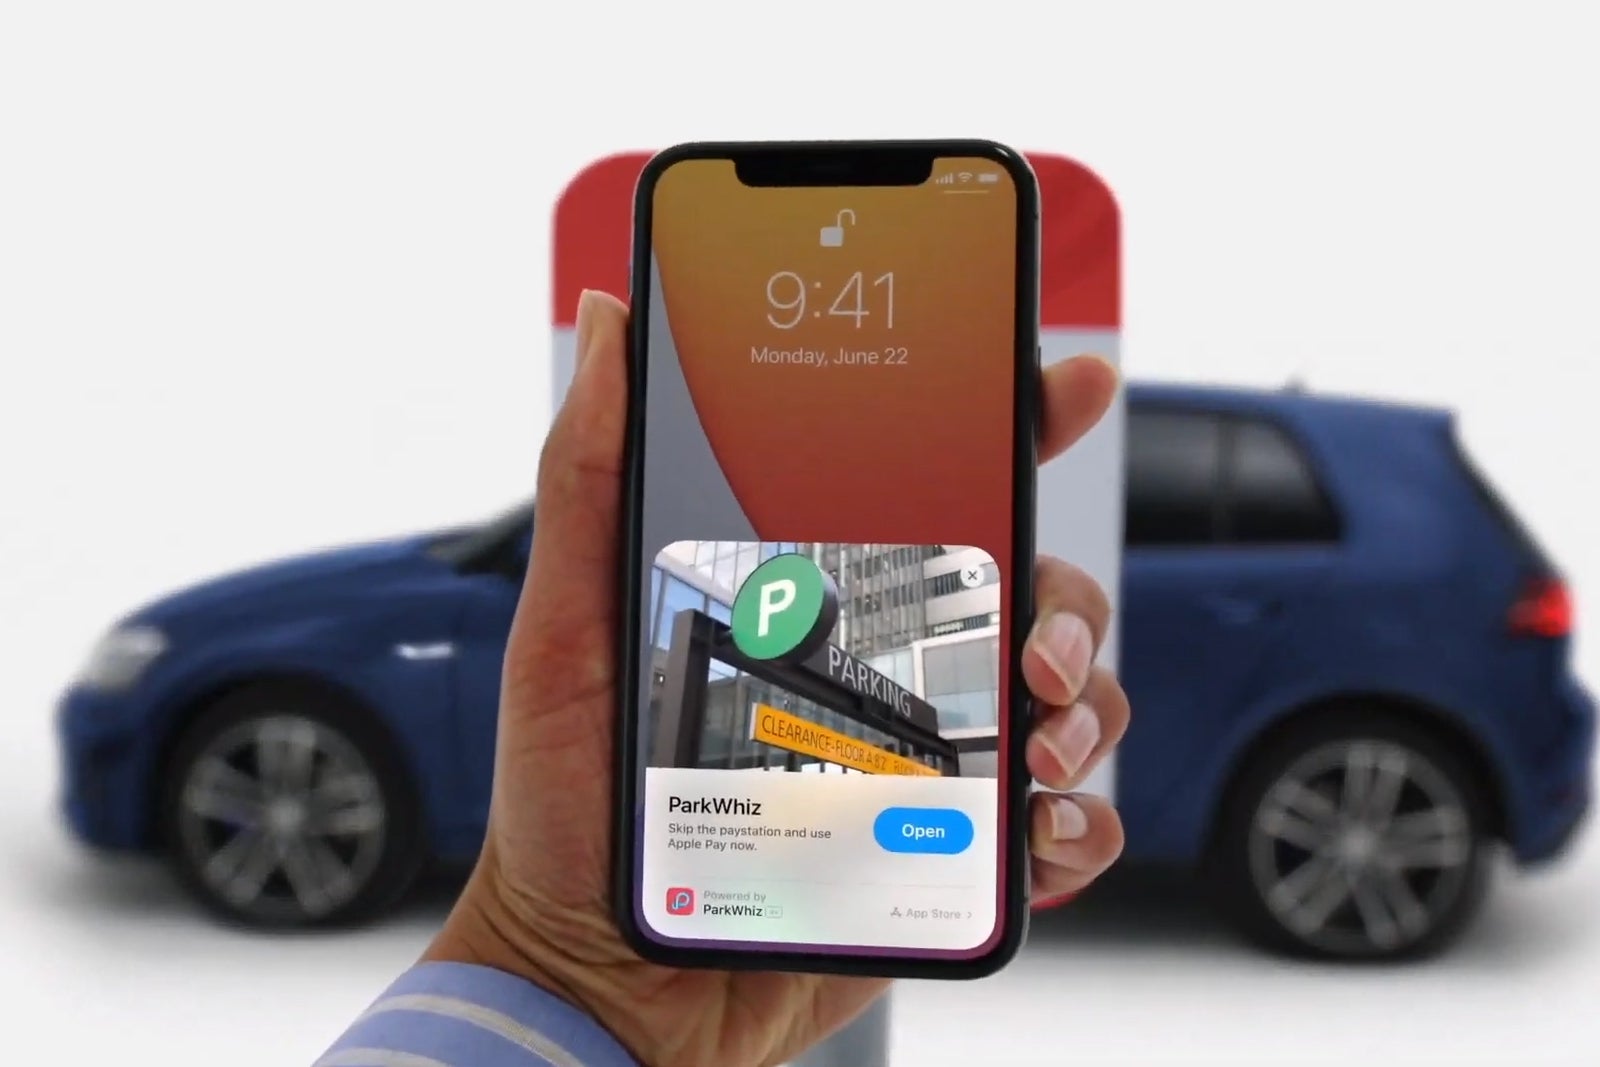 App Clips in iOS 14 are bite-sized portions of apps that can come up in different situations without having to download or install anything on your phone - iOS 14 is official – All the new features